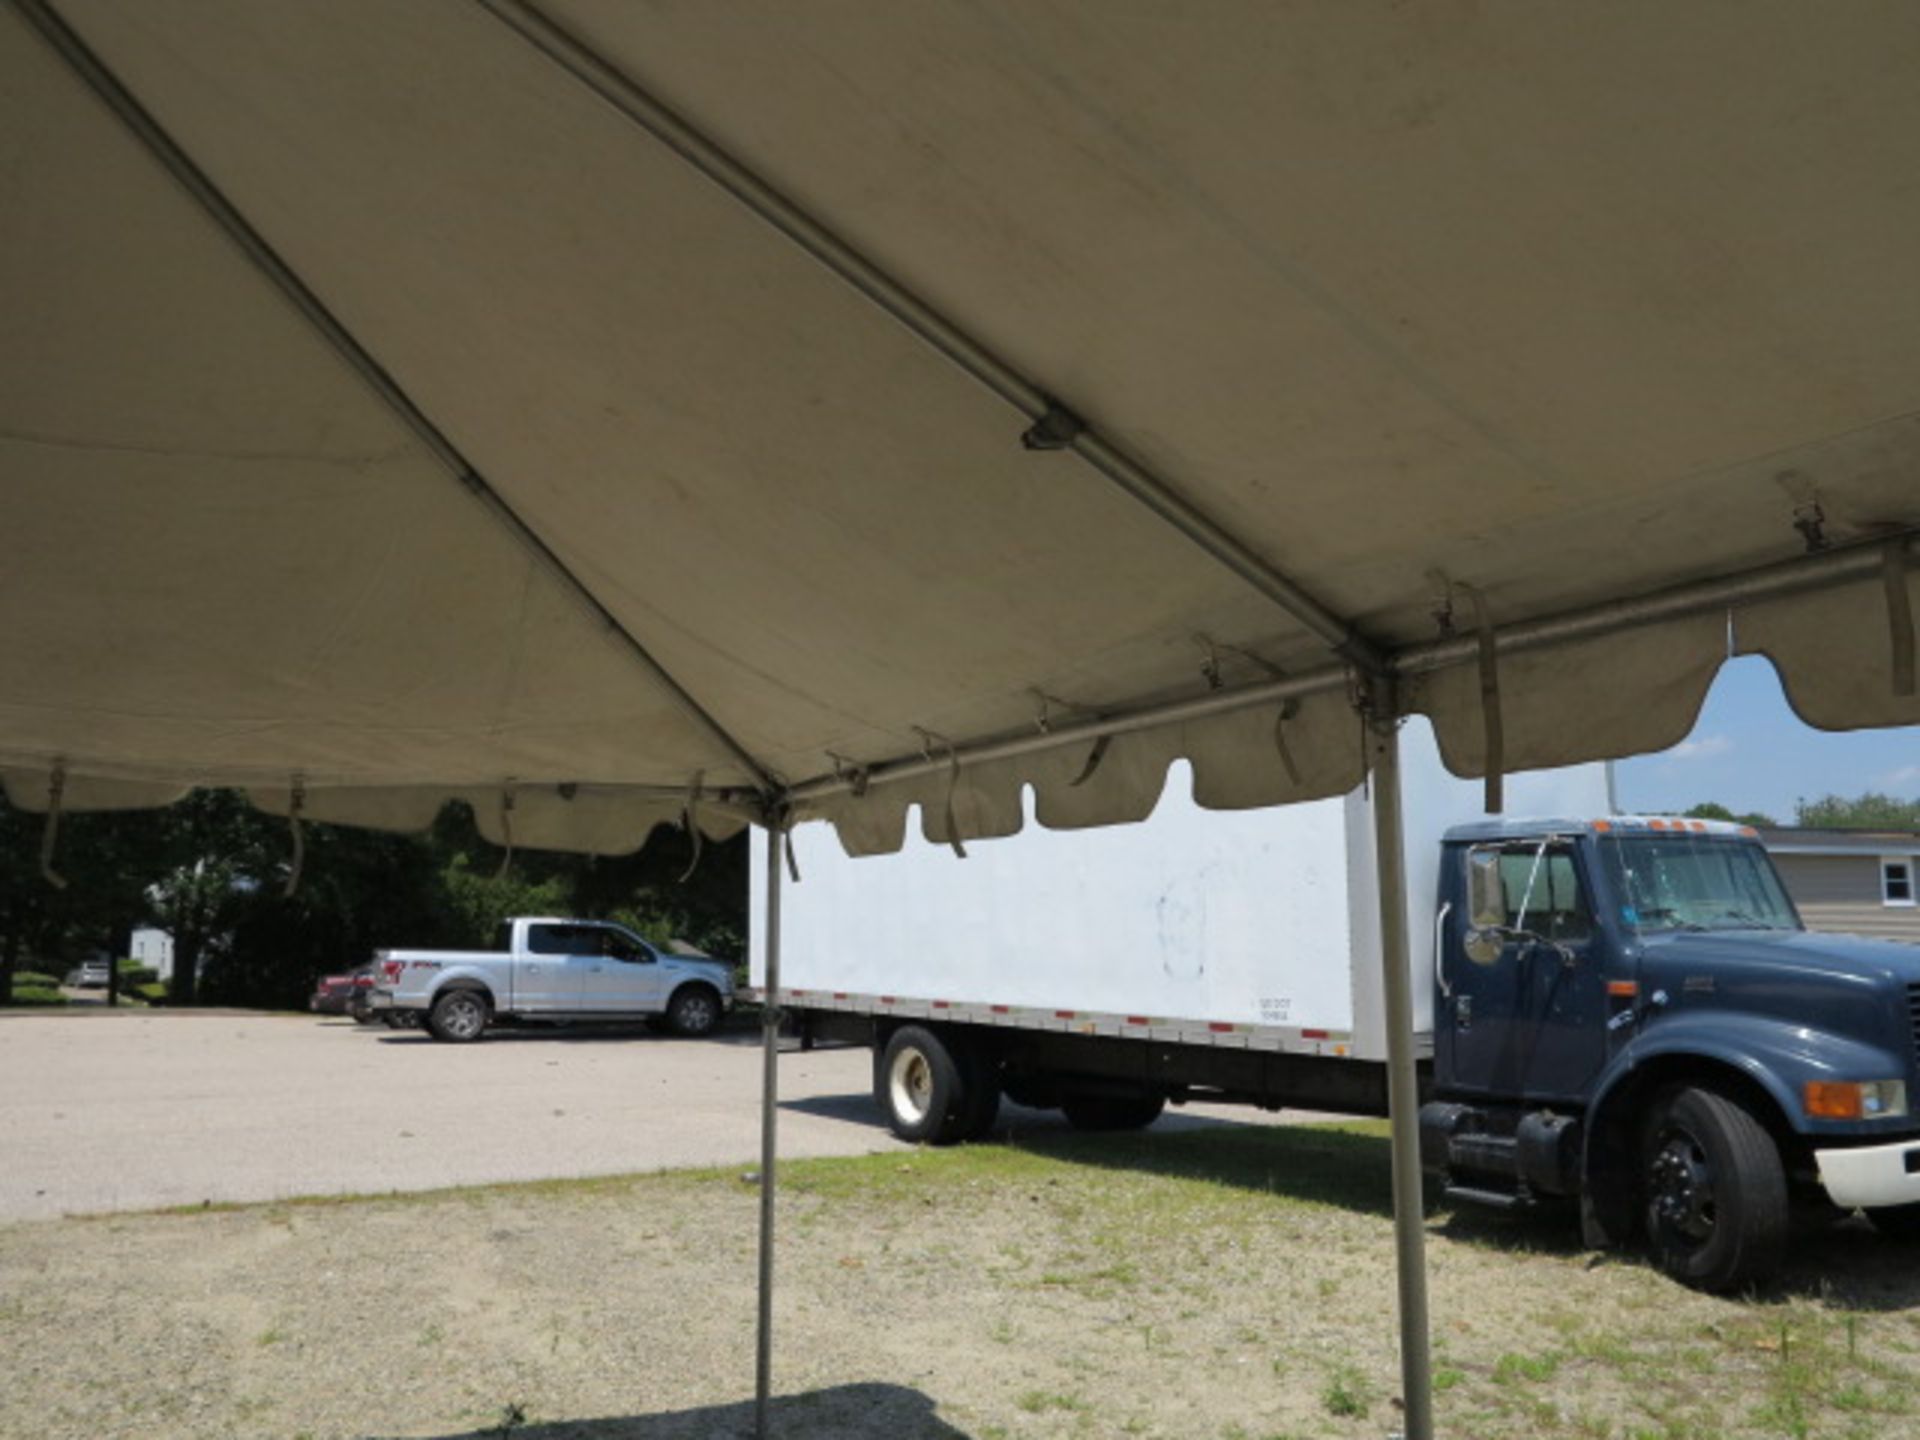 20' x 30' White Tent w/ Hardware Any images provided are for bidder's guidance only. See Terms of - Image 7 of 7